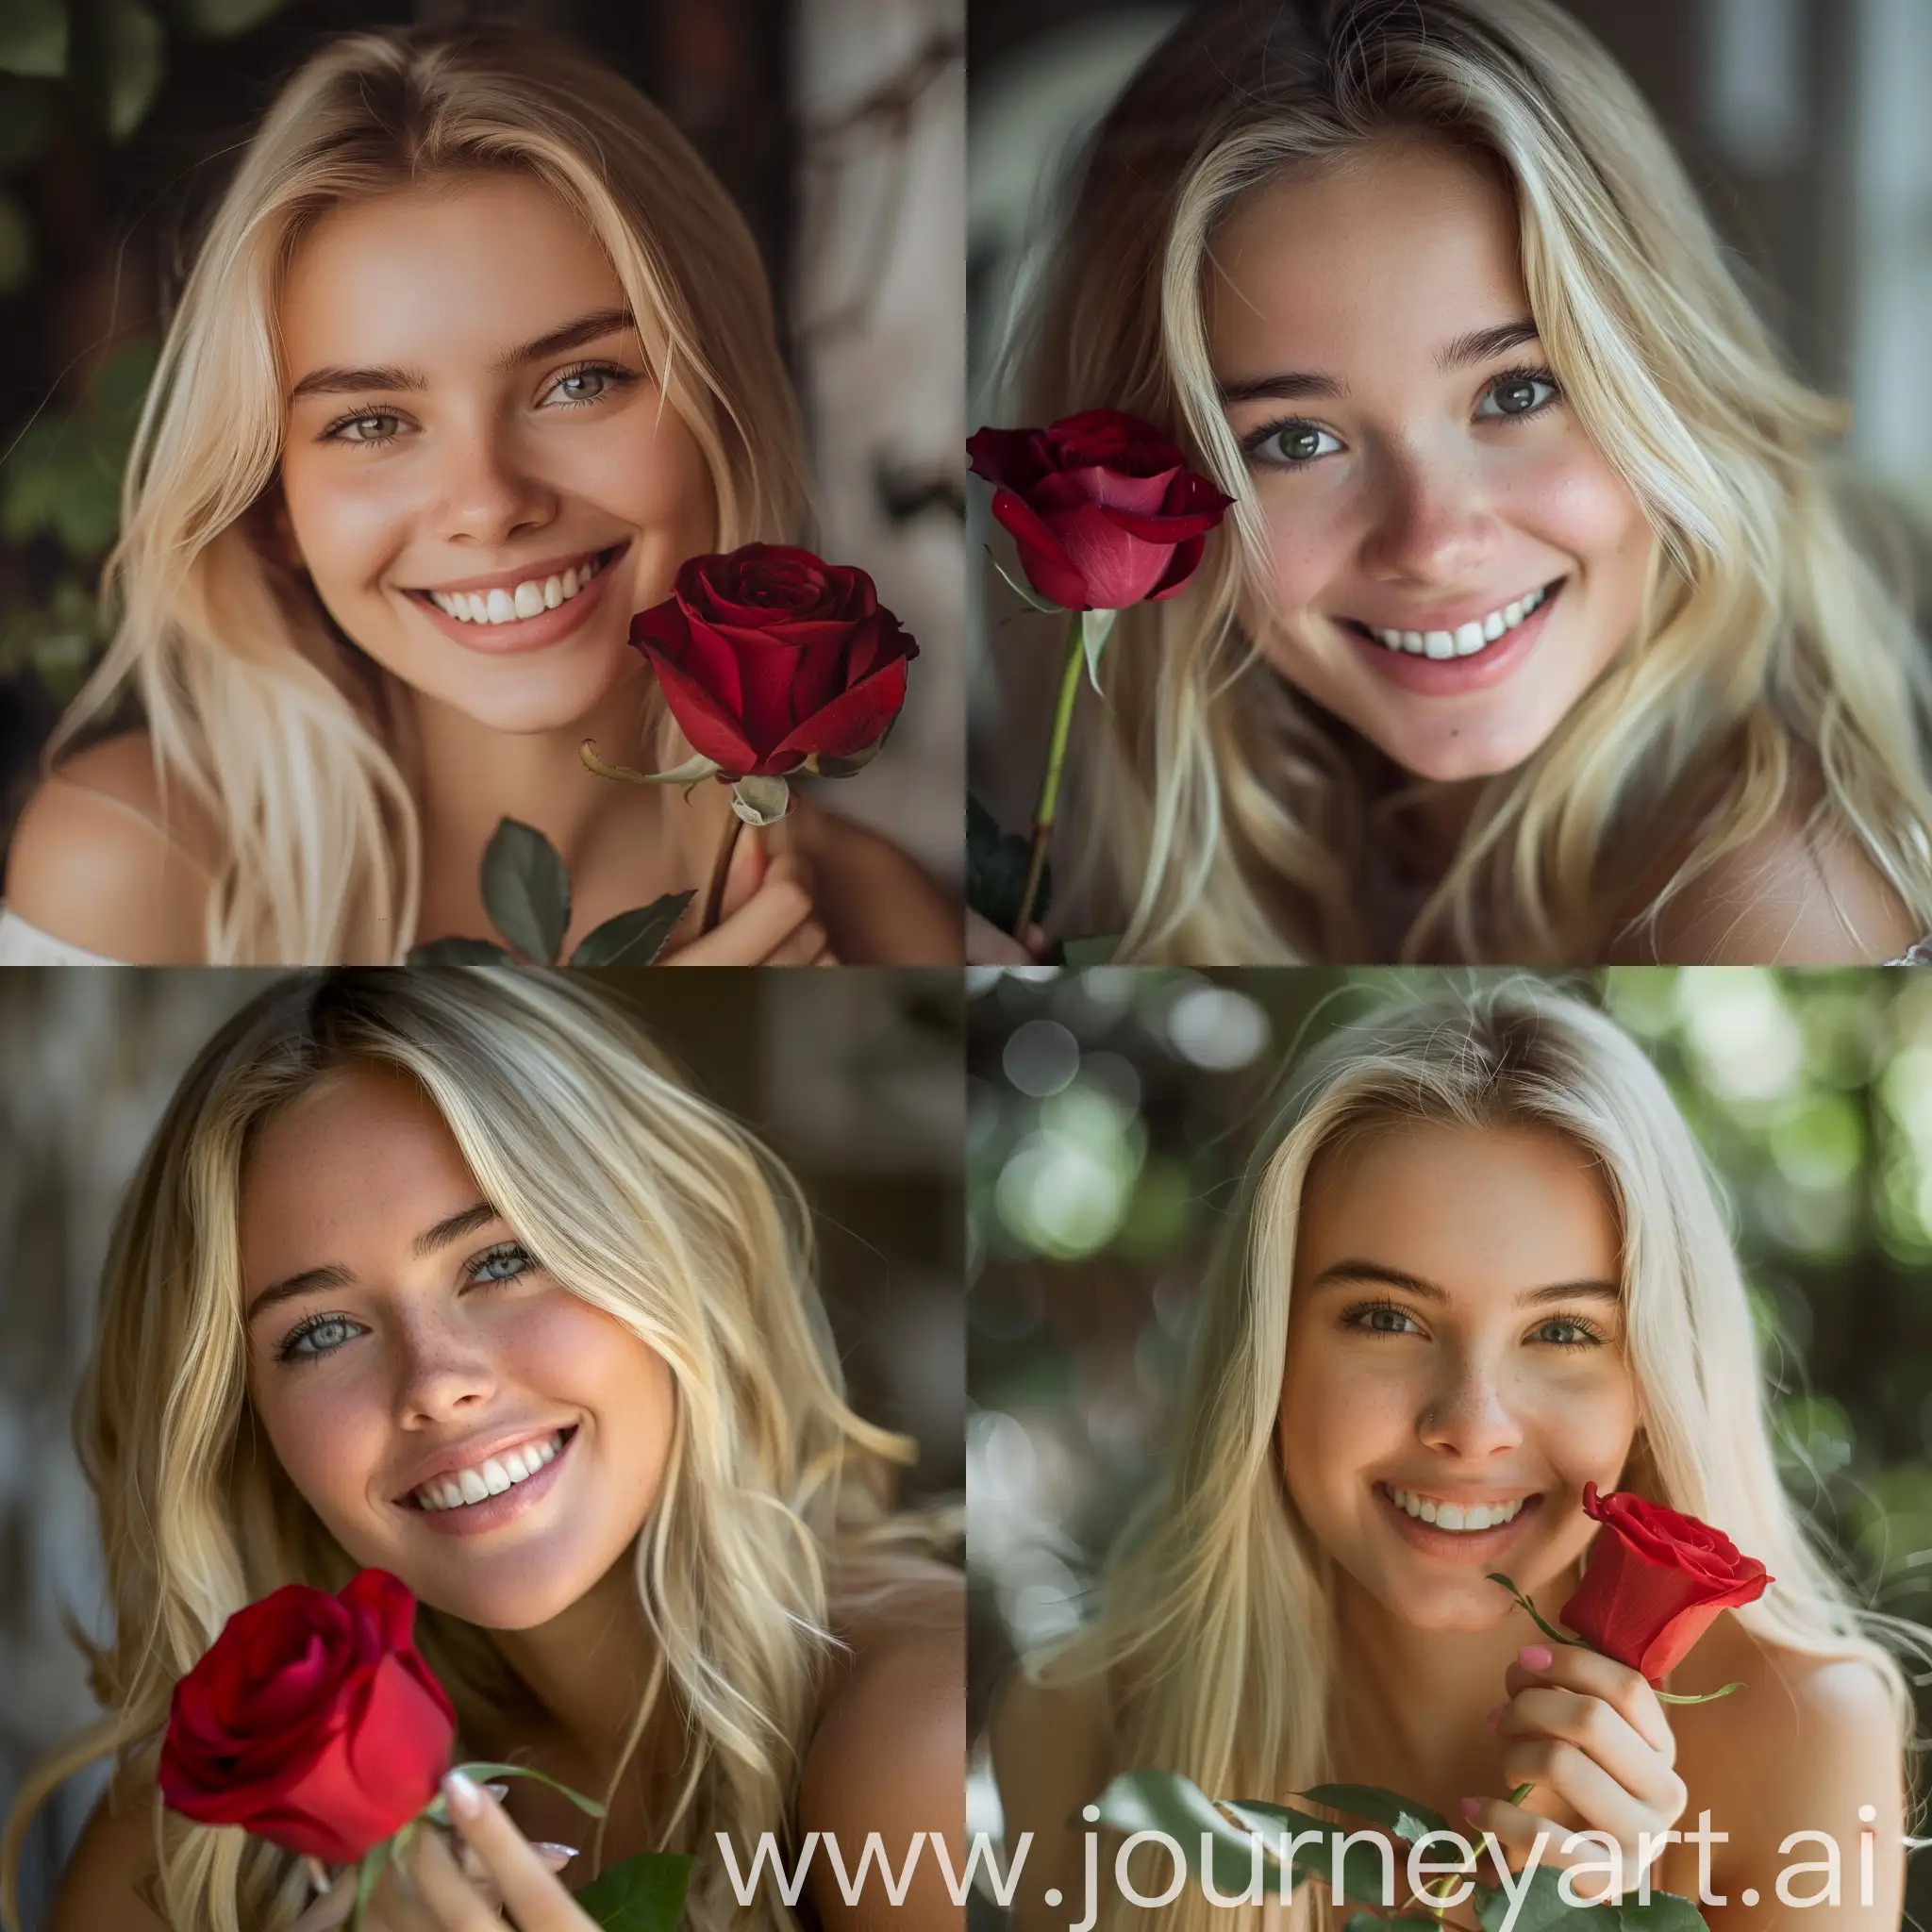 A beautiful blonde girl in her prime, smiling as she looks at the camera, holding a red rose in her hand. The girl is beautiful and very beautiful, her features are feminine and soft, and she looks with love